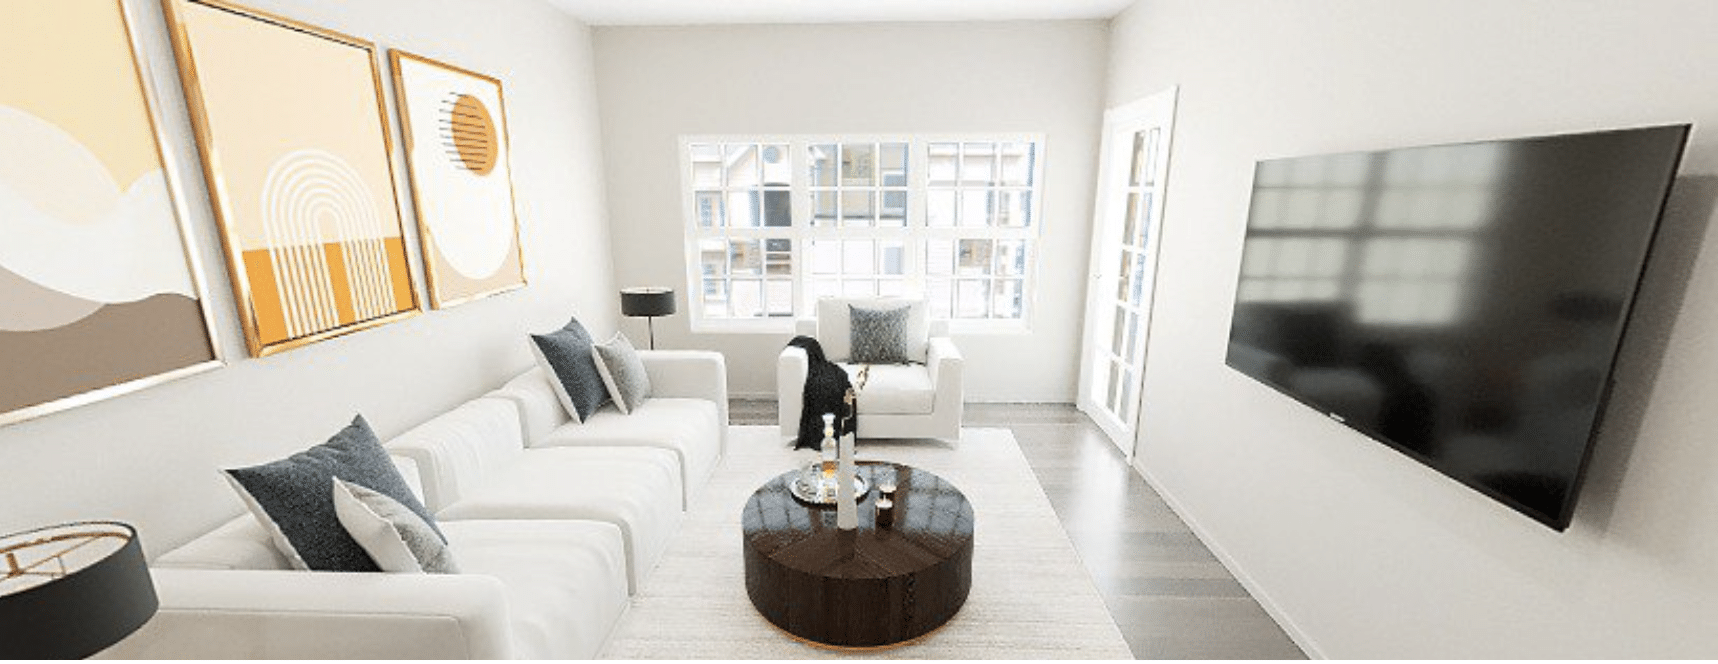 silverbrooke new construction living room view